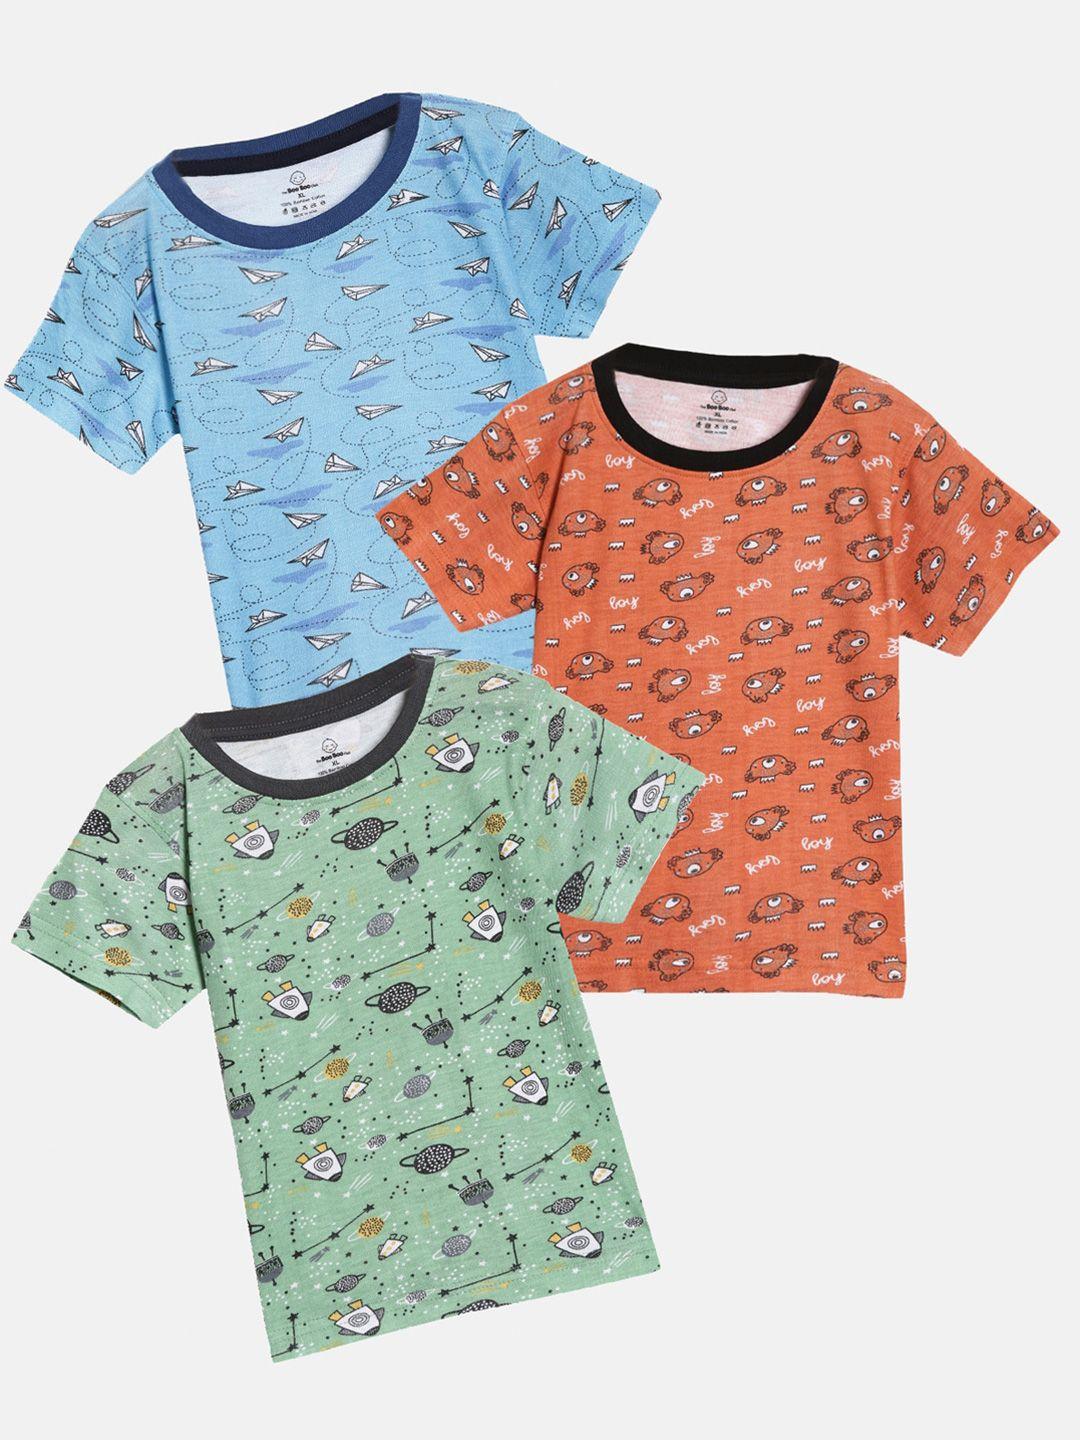 the boo boo club kids pack of 3 bamboo printed short sleeves t-shirts